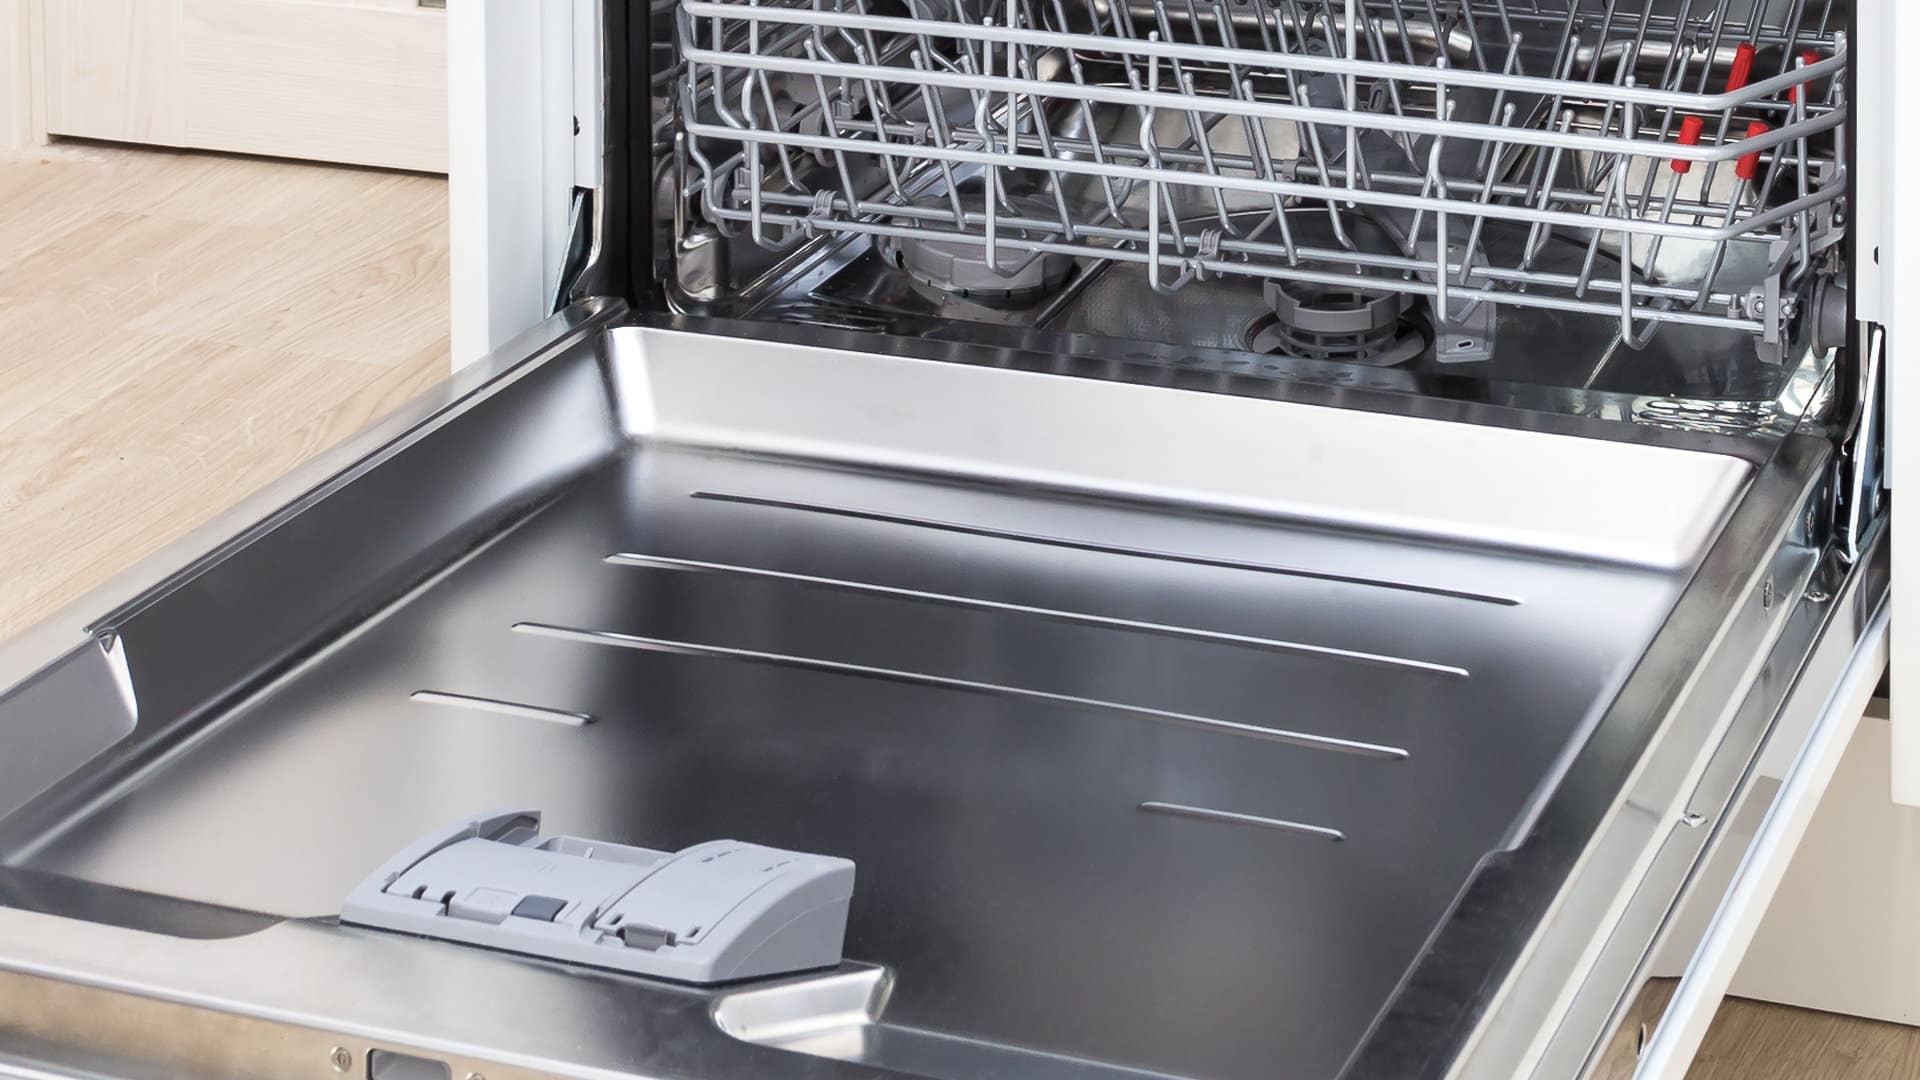 Bosch Dishwasher Not Draining? Here's What to Do - A to Z Appliance Service